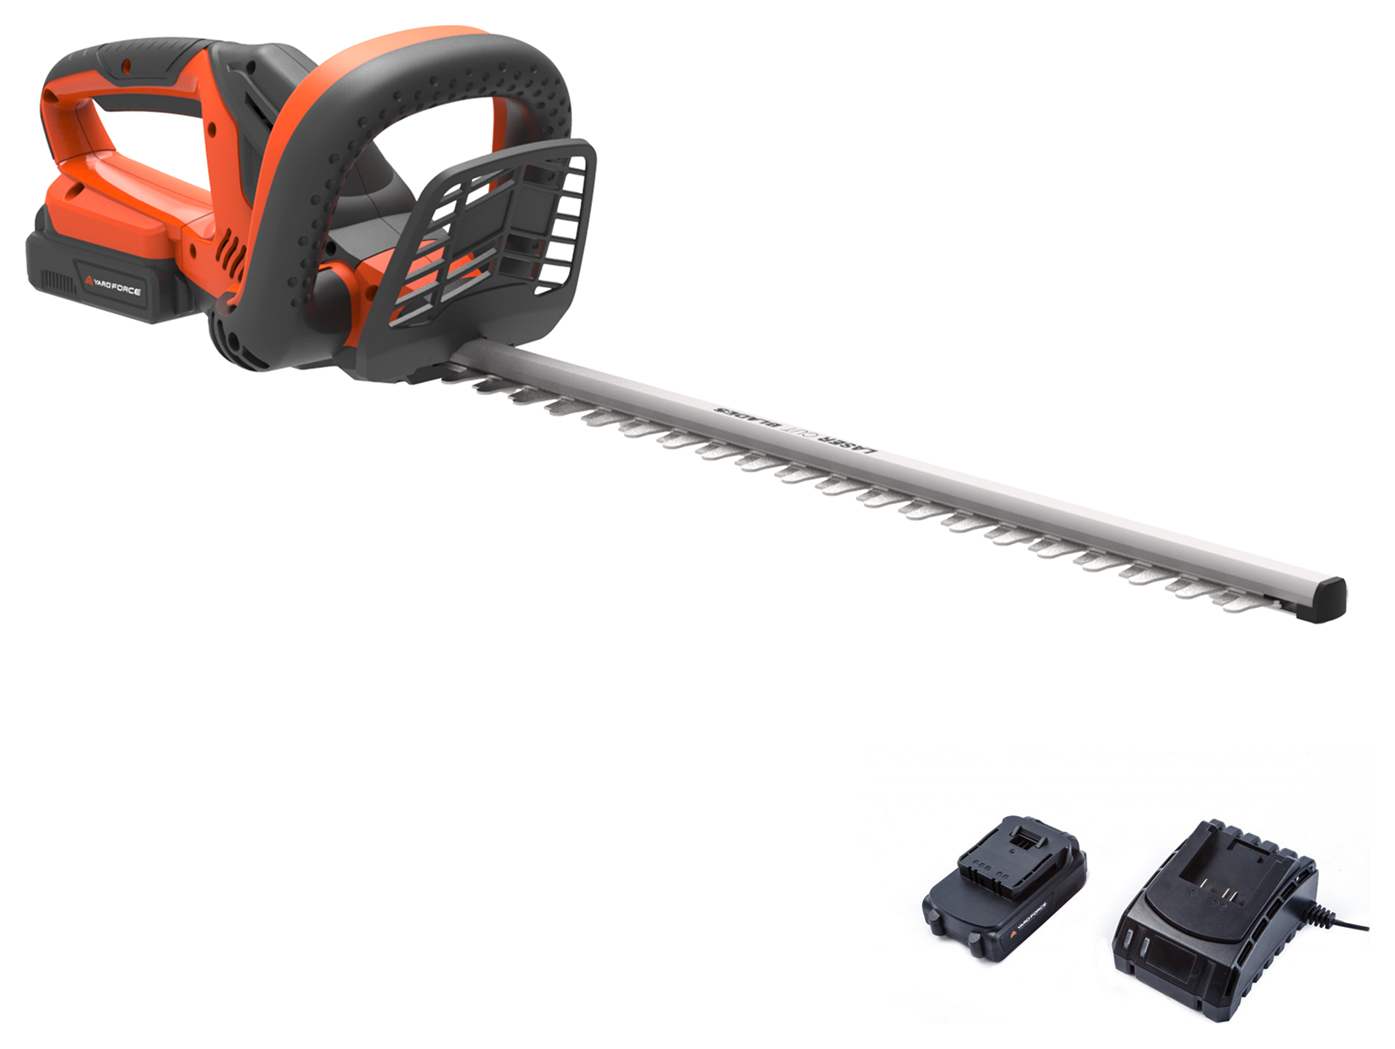 Image of Yard Force LH C45 20V Cordless Hedge Trimmer 1 x 2.0Ah Li-Ion Battery & Charger